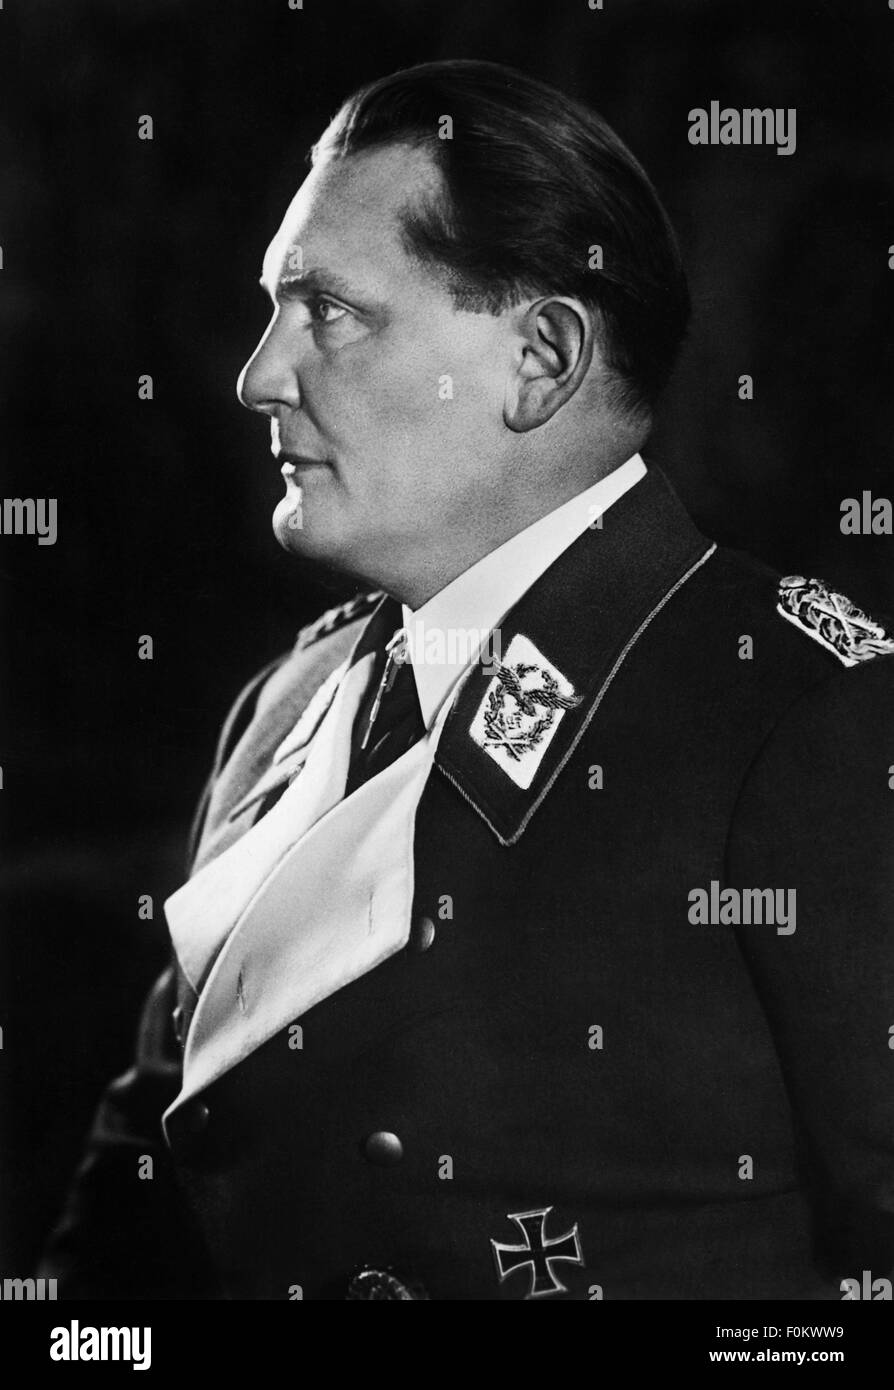 Goering, Hermann, 12.1.1893 - 15.10.1946, German politician (NSDAP), half length, as supreme commander of the Luftwaffe (German Air Force) wearing the uniform of a Field Marshal, 1938 / 1939, Stock Photo